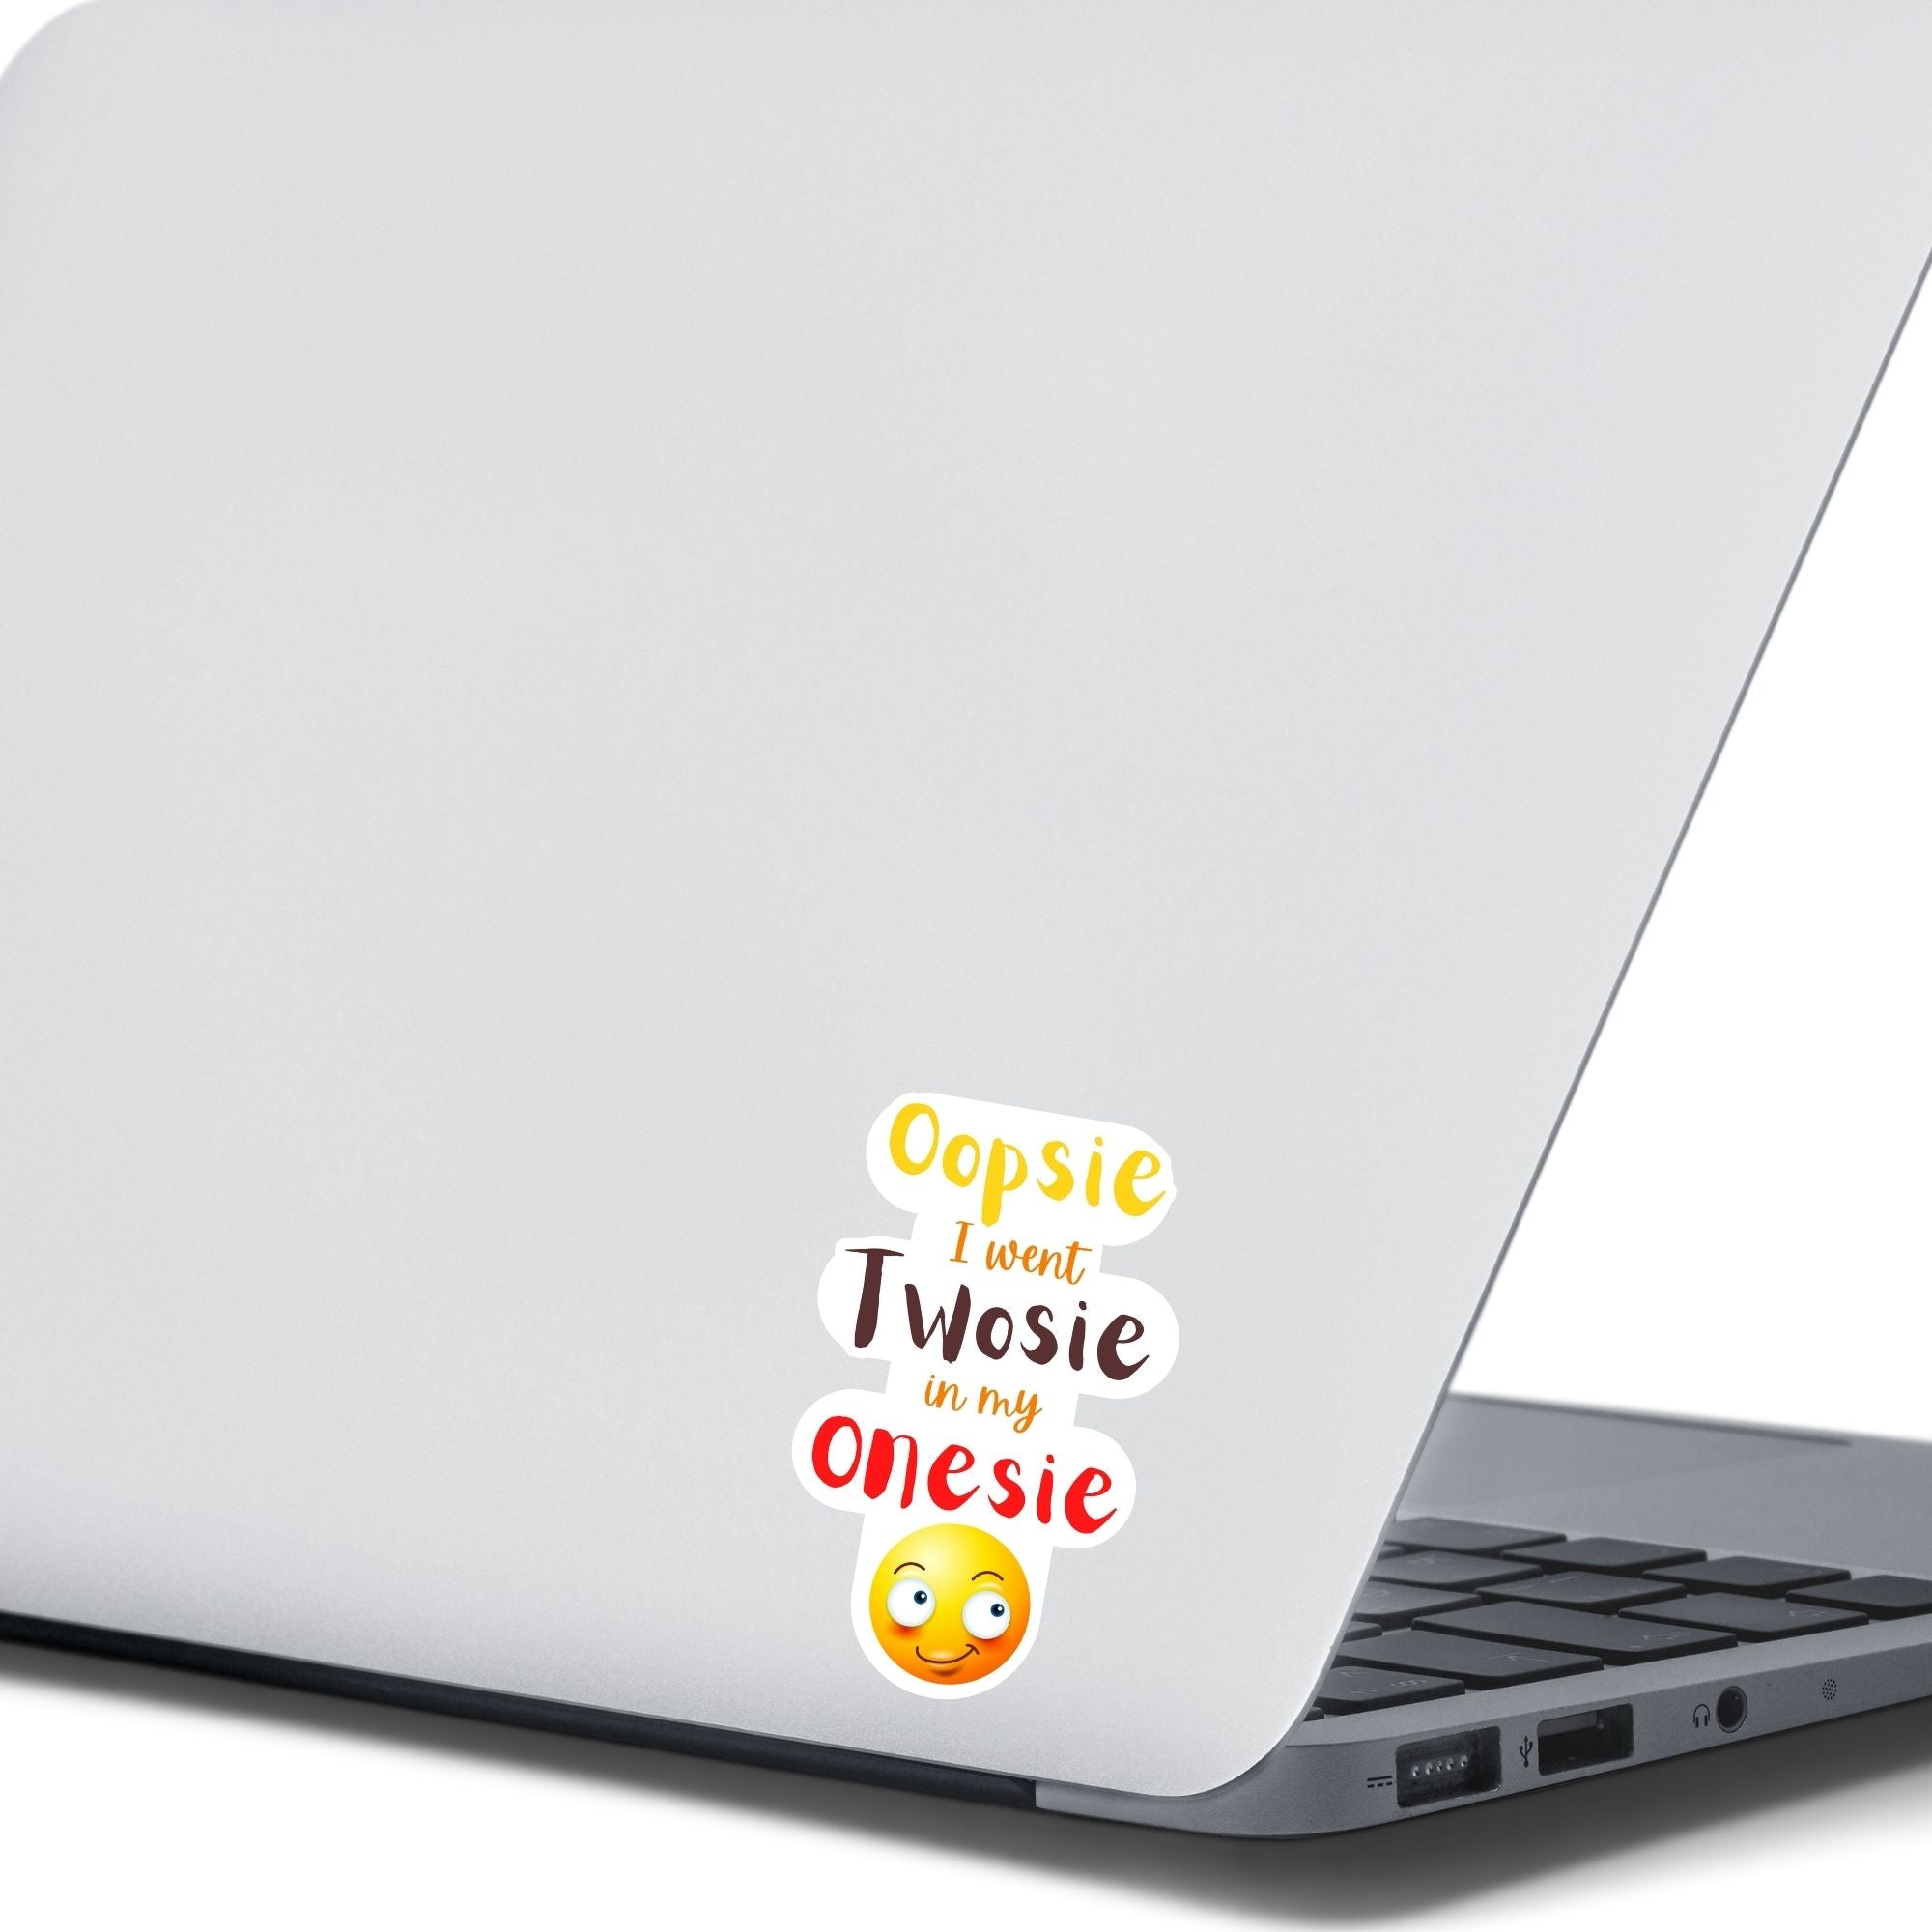 Oopsie, I went Twosie in my Onesie... Anyone who has had a baby knows that this happens! This makes a cute gift for people who are expecting, and you can pair it with one or more of our baby themed sticker sheets. This image shows the Oopsie sticker on the back of an open laptop.